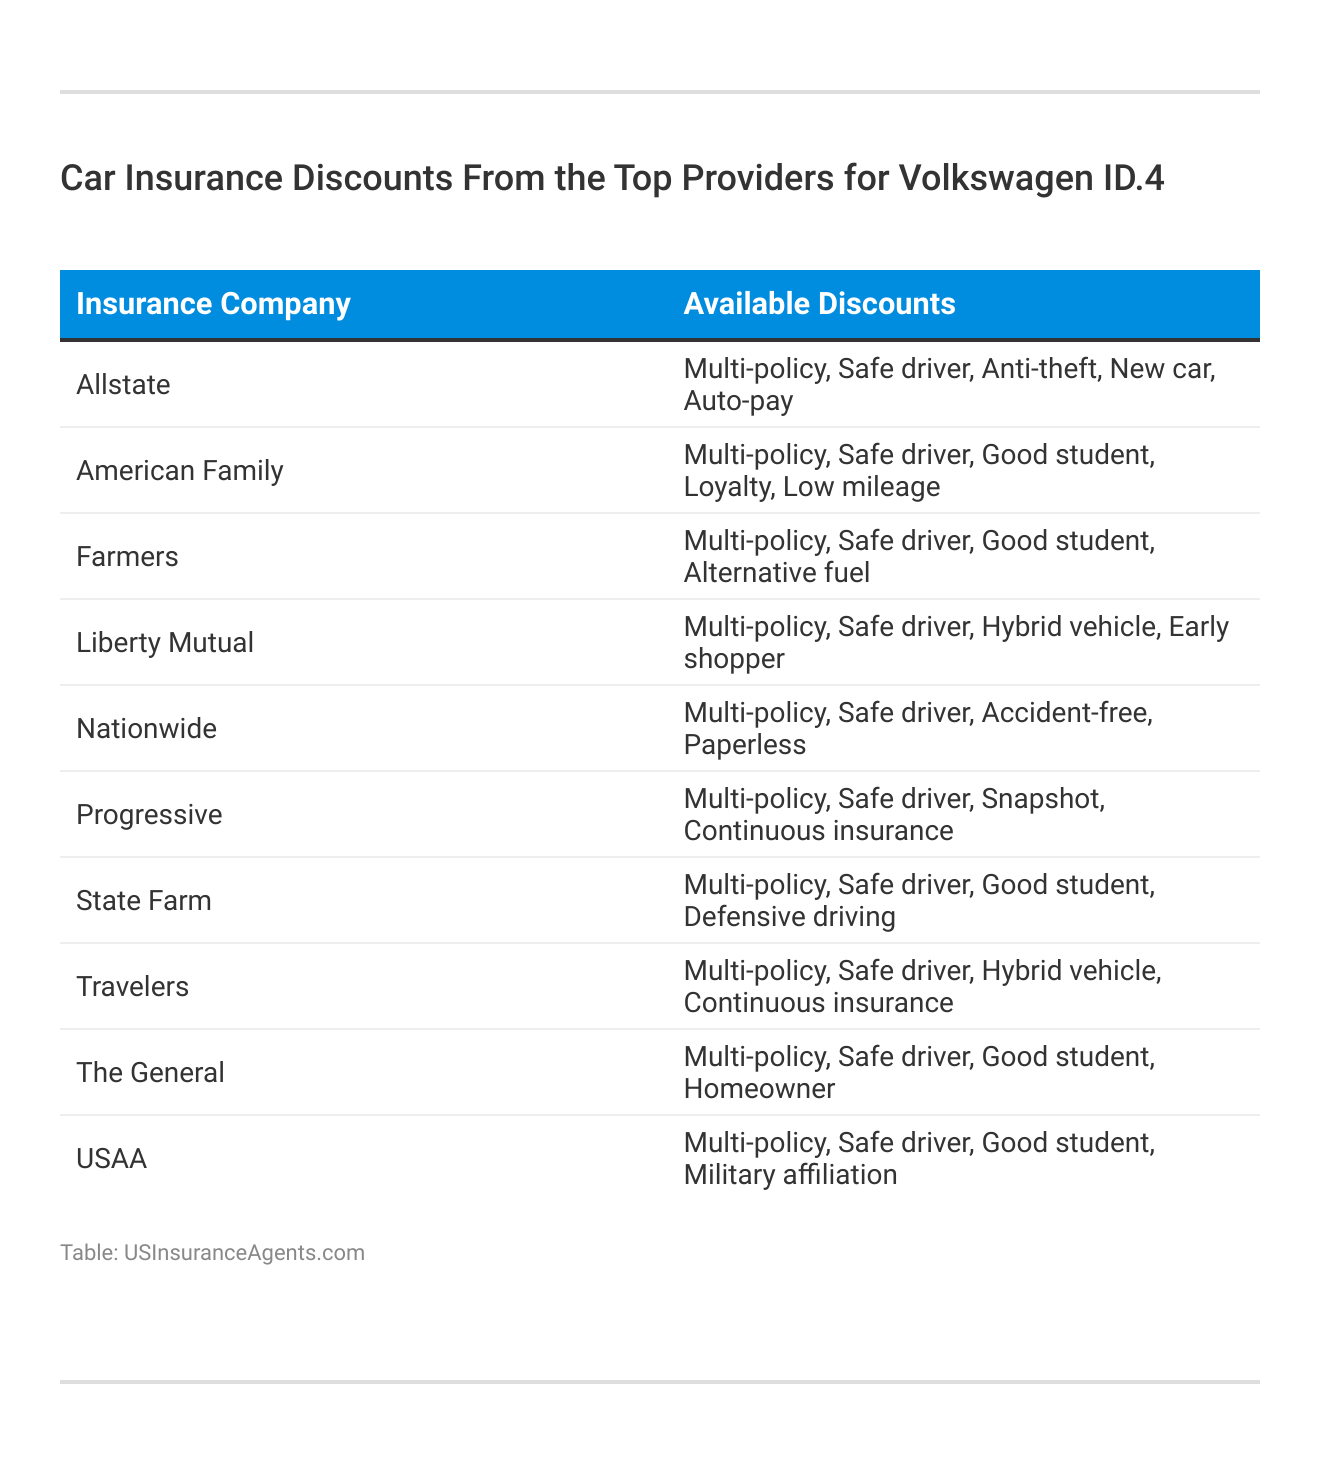 <h3>Car Insurance Discounts From the Top Providers for Volkswagen ID.4</h3>